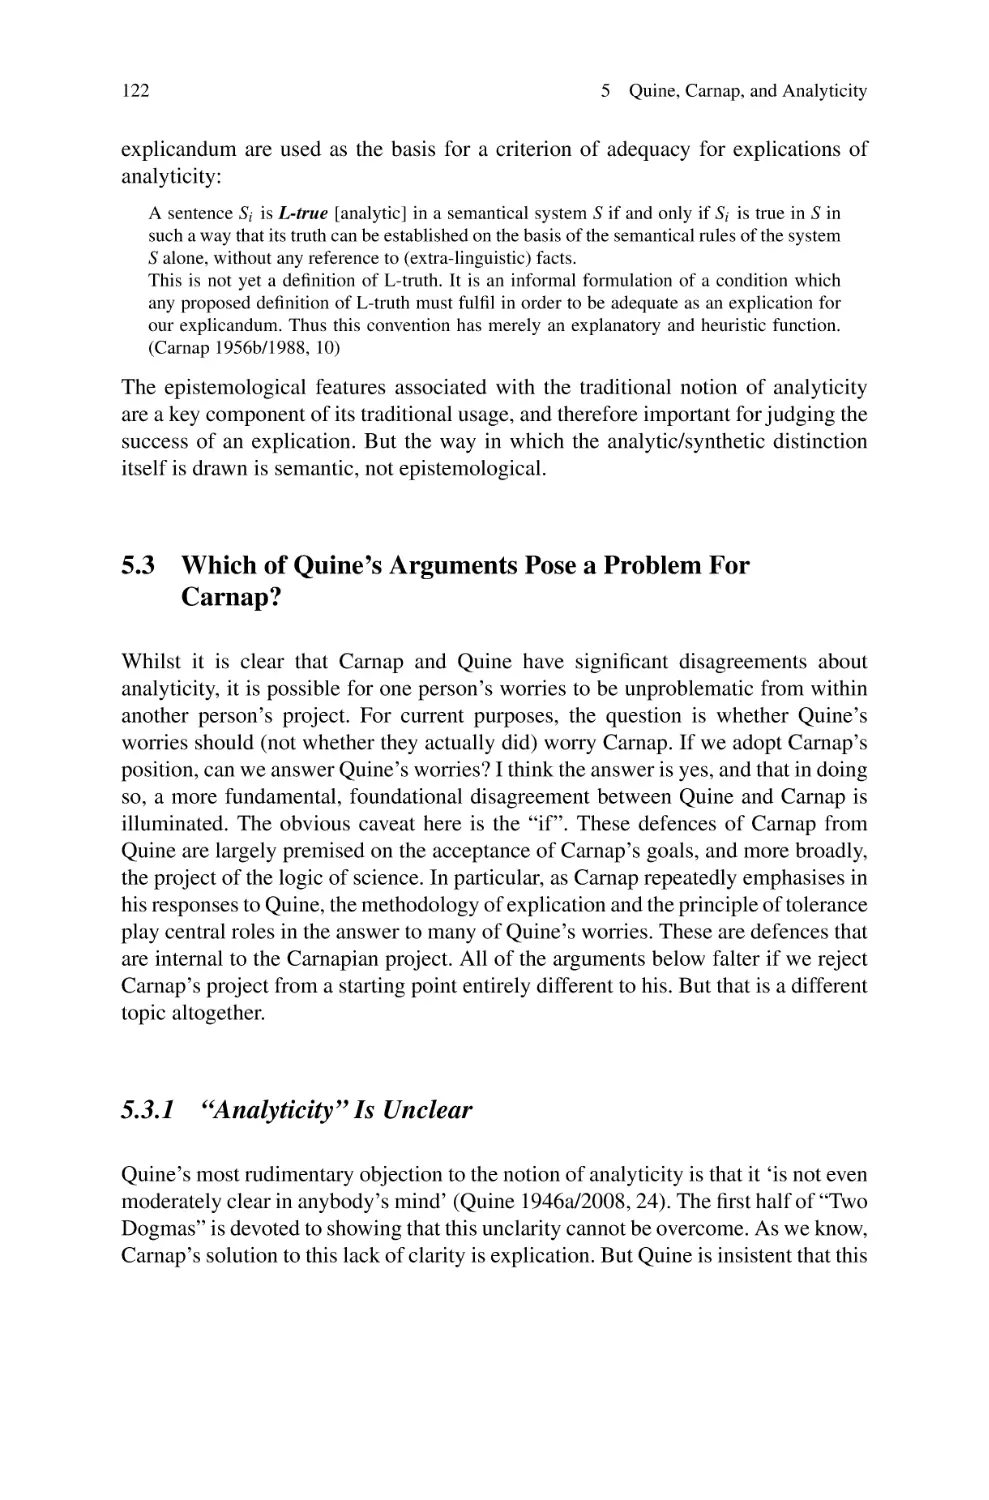 5.3 Which of Quine's Arguments Pose a Problem For Carnap?
5.3.1 ``Analyticity'' Is Unclear